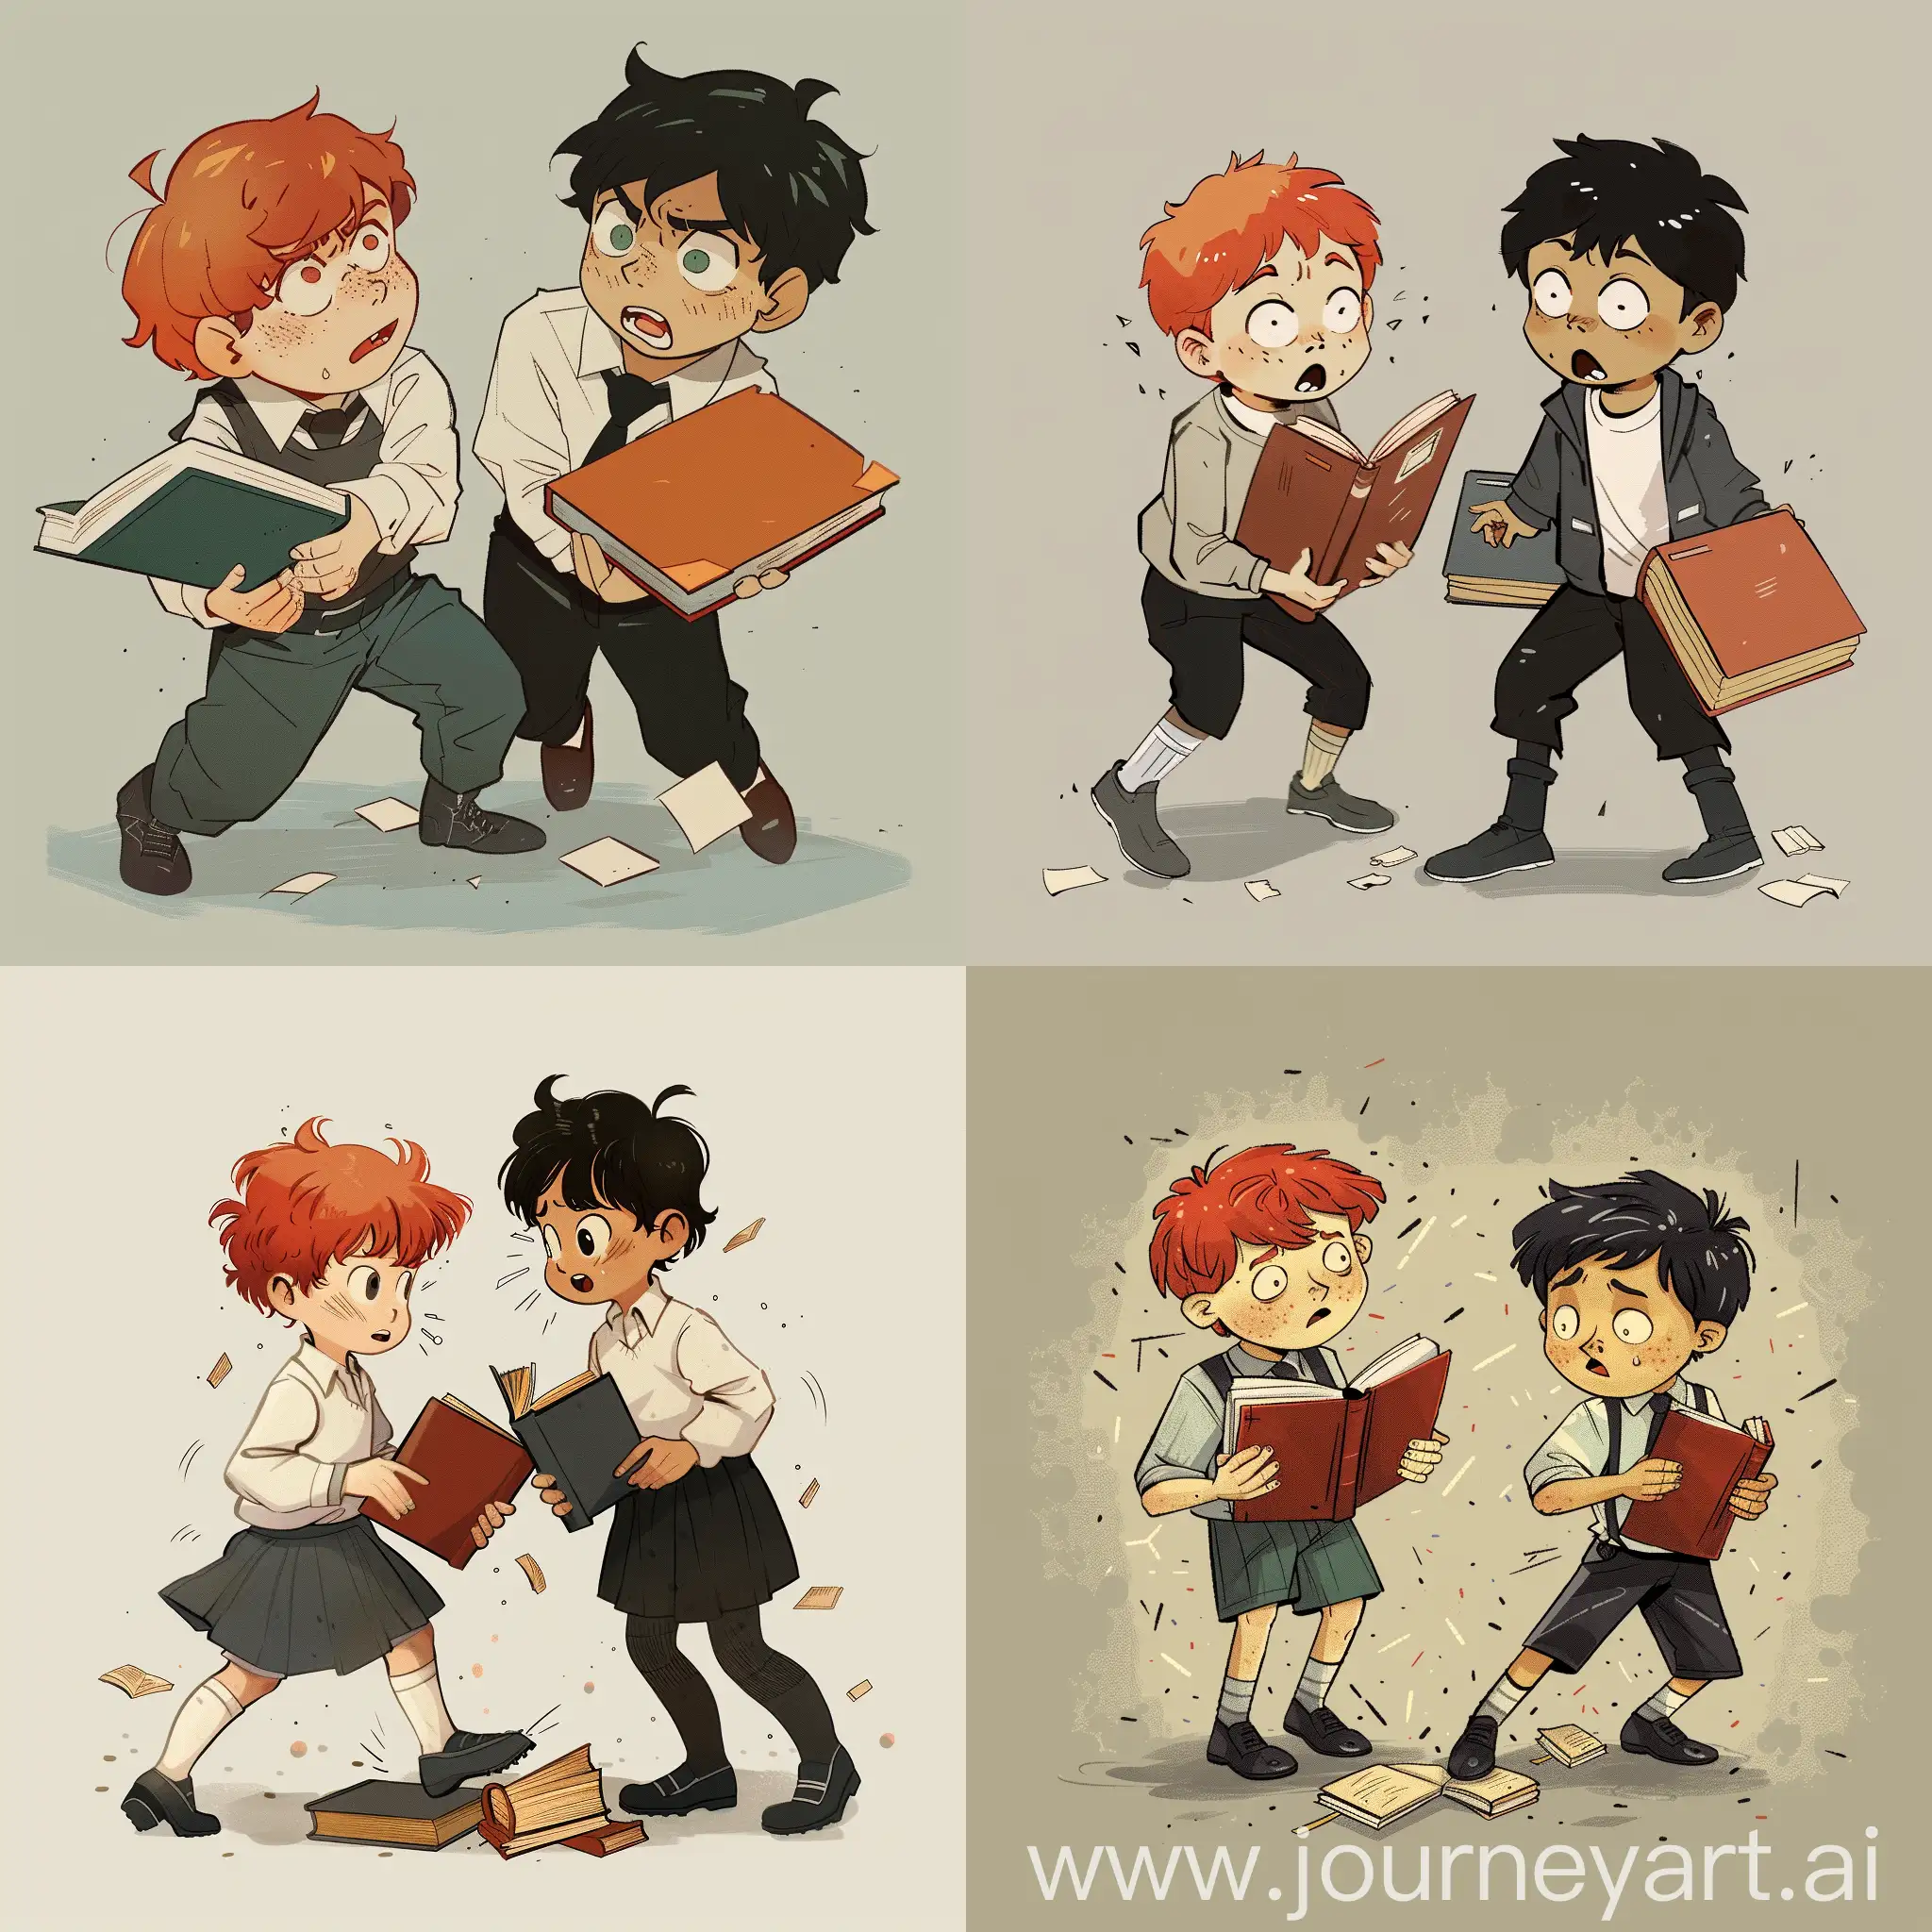 Two BL boys, one with red hair and the other with black hair, are holding books in their hands and they bumped into each other, dropping their books on the floor and looking at me with surprise and concern.